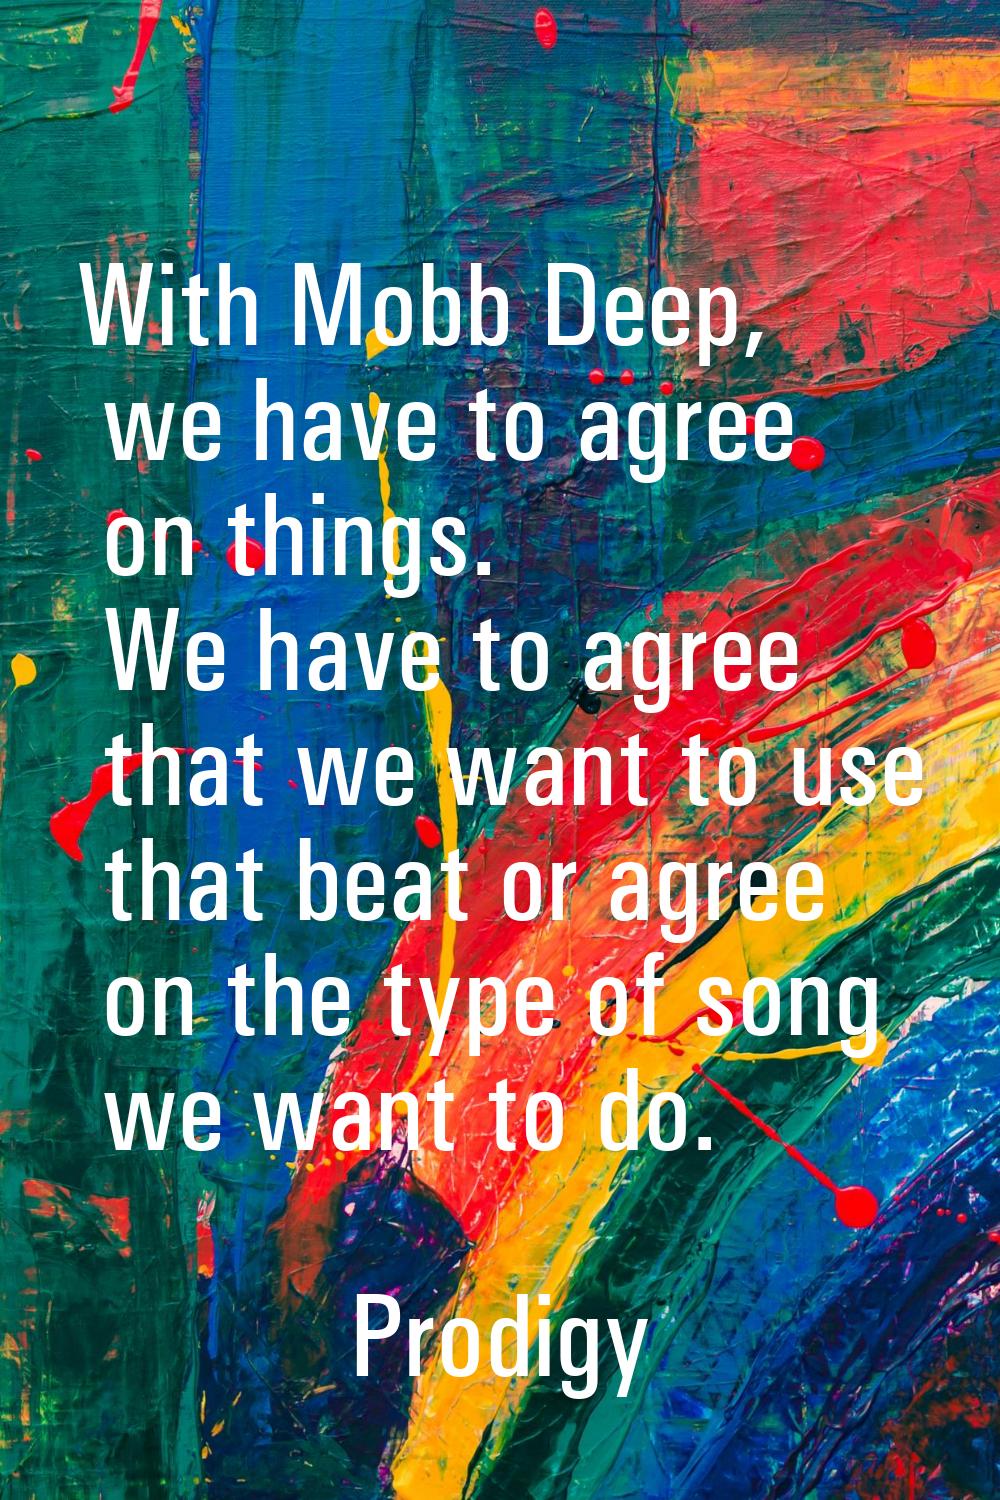 With Mobb Deep, we have to agree on things. We have to agree that we want to use that beat or agree